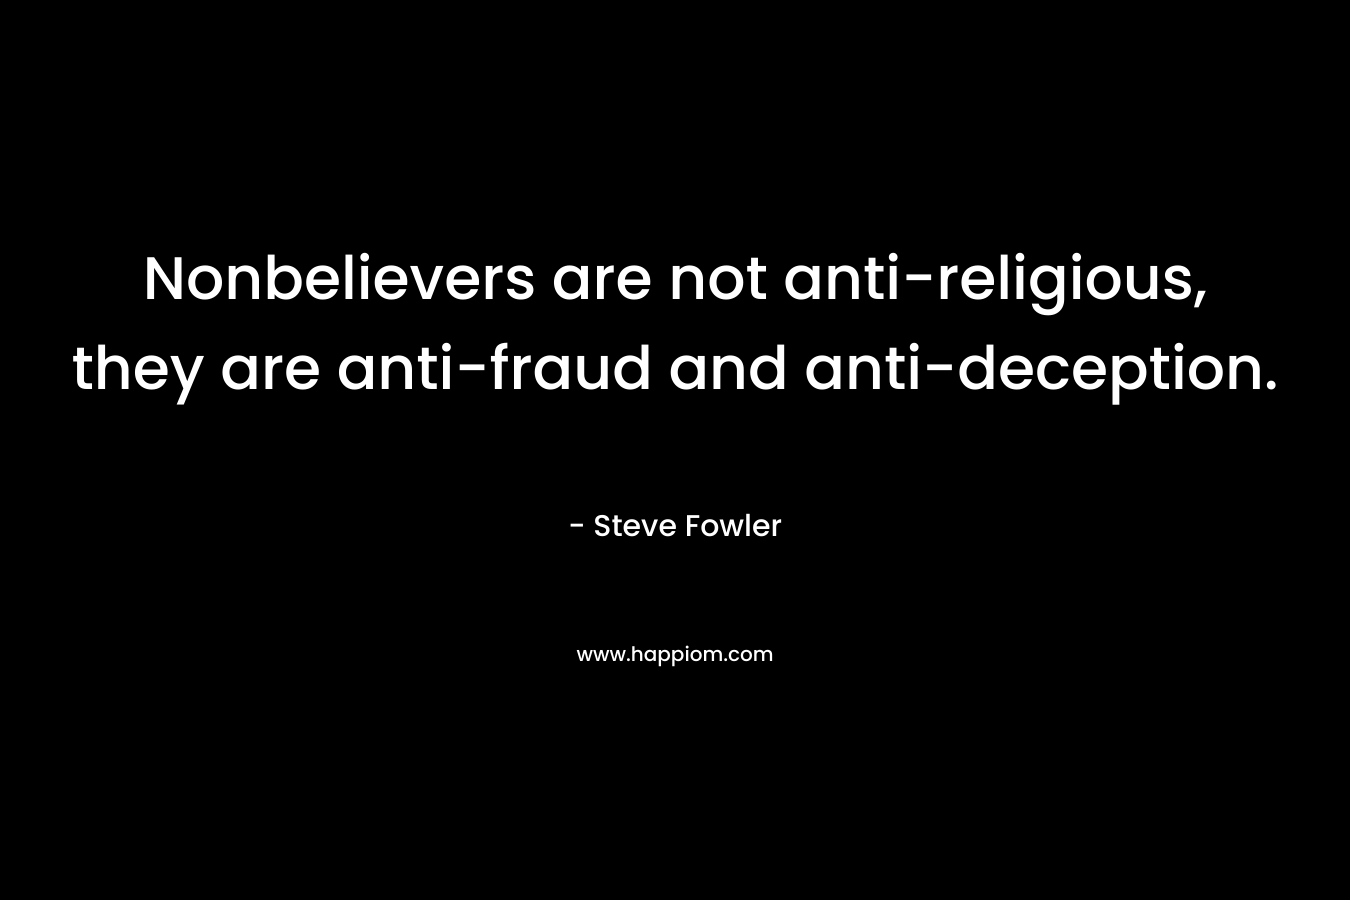 Nonbelievers are not anti-religious, they are anti-fraud and anti-deception.